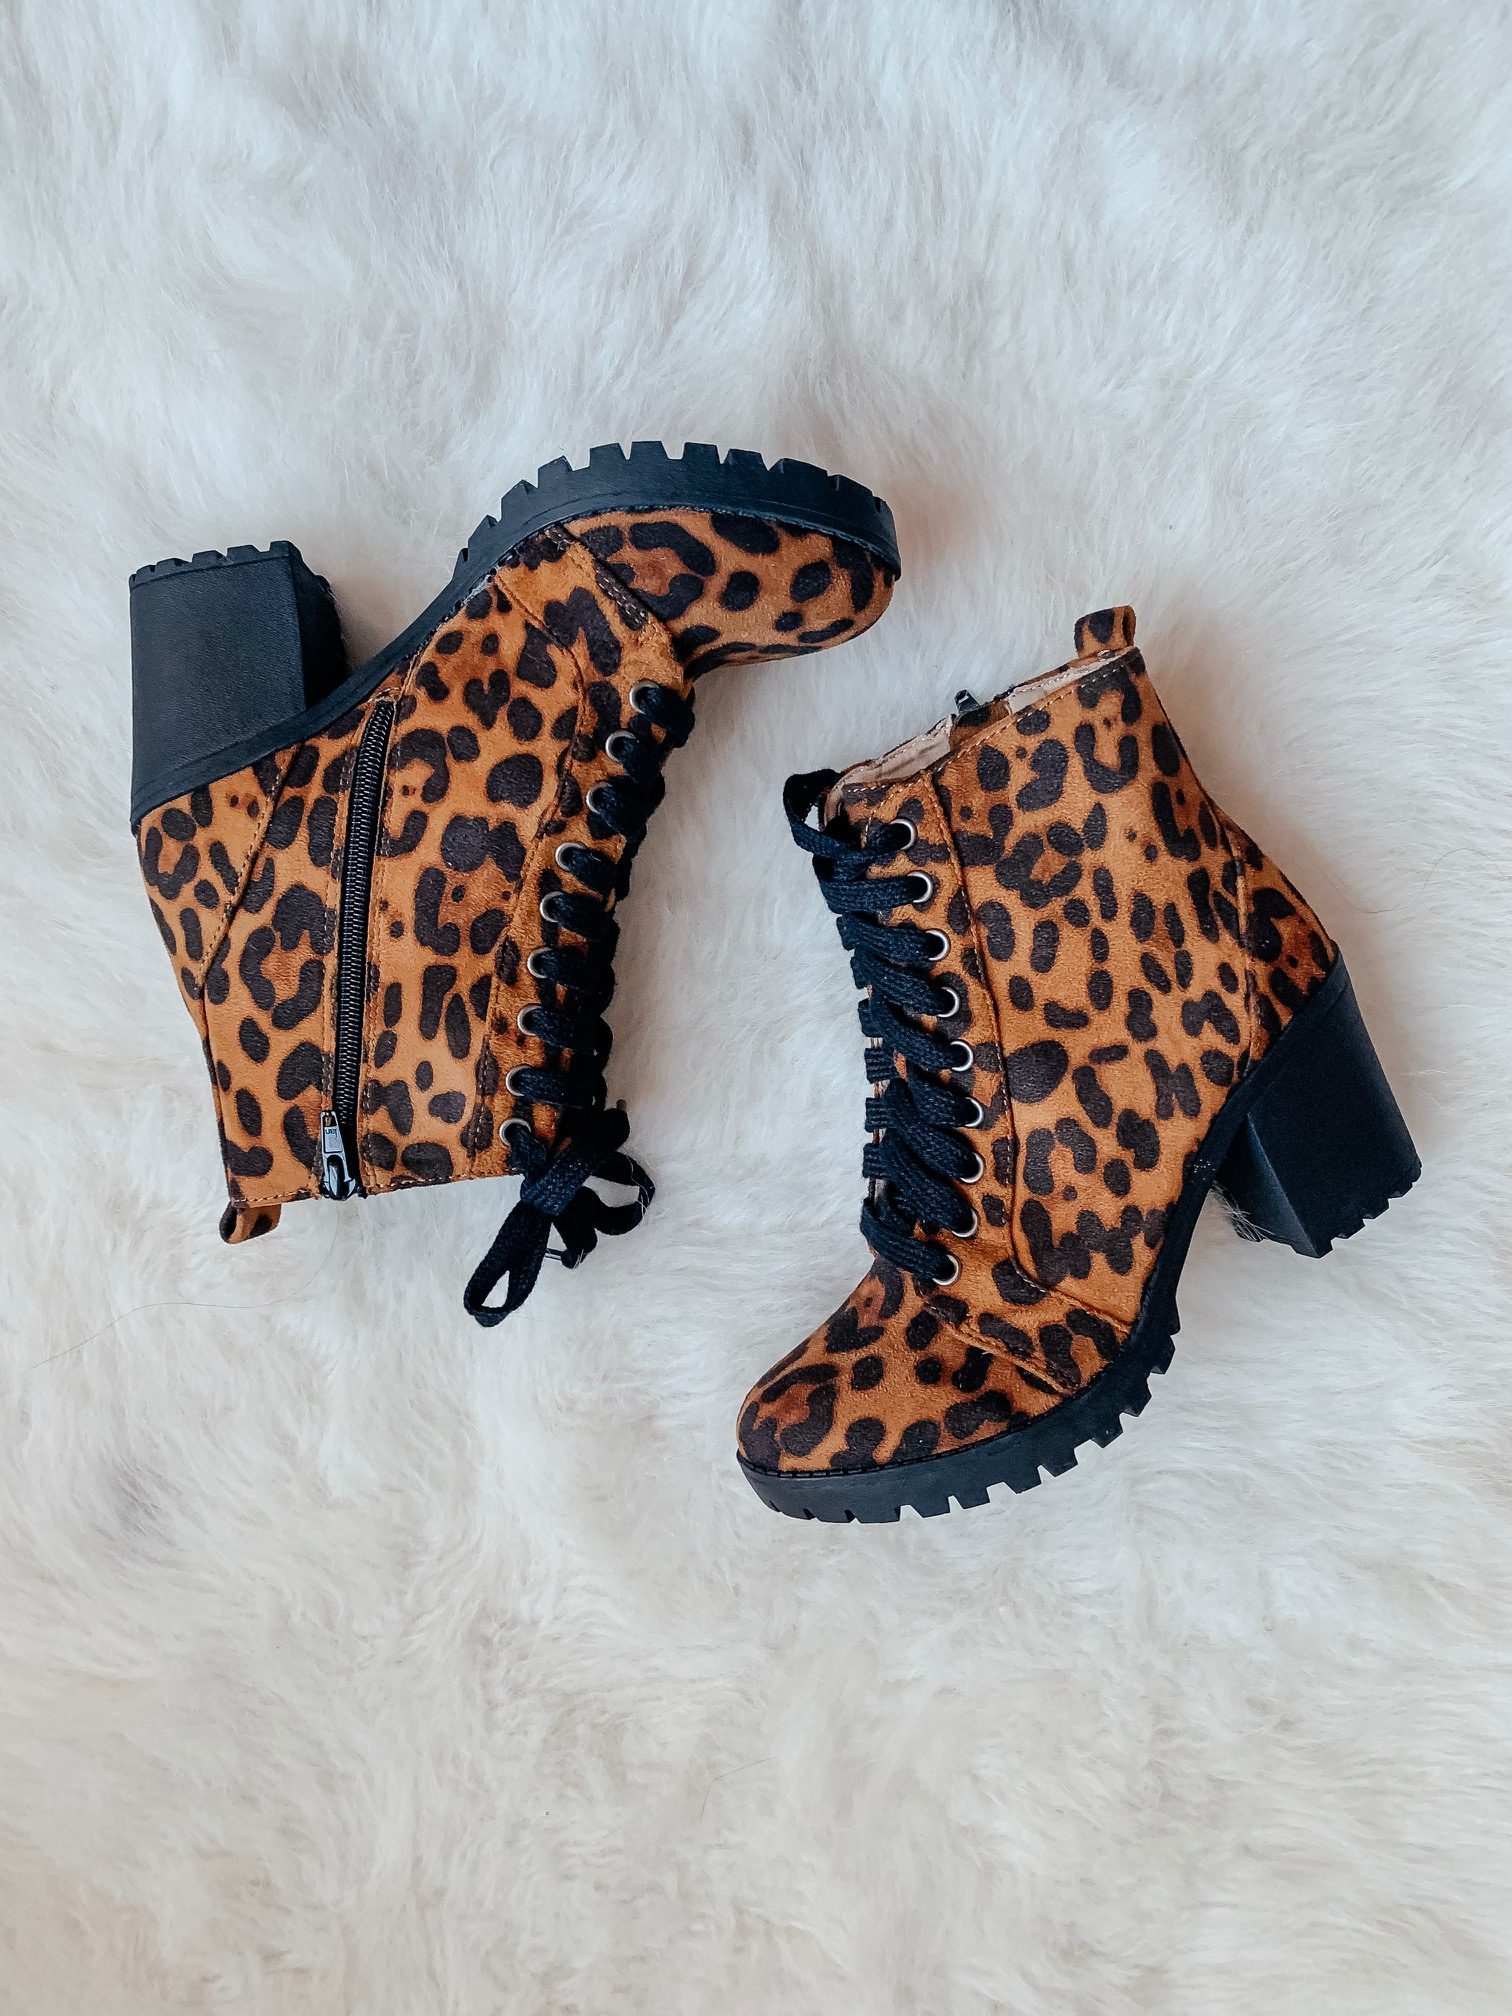 WALMART FALL HAUL - Everything under $35!!! - Leopard booties on Coming Up Roses